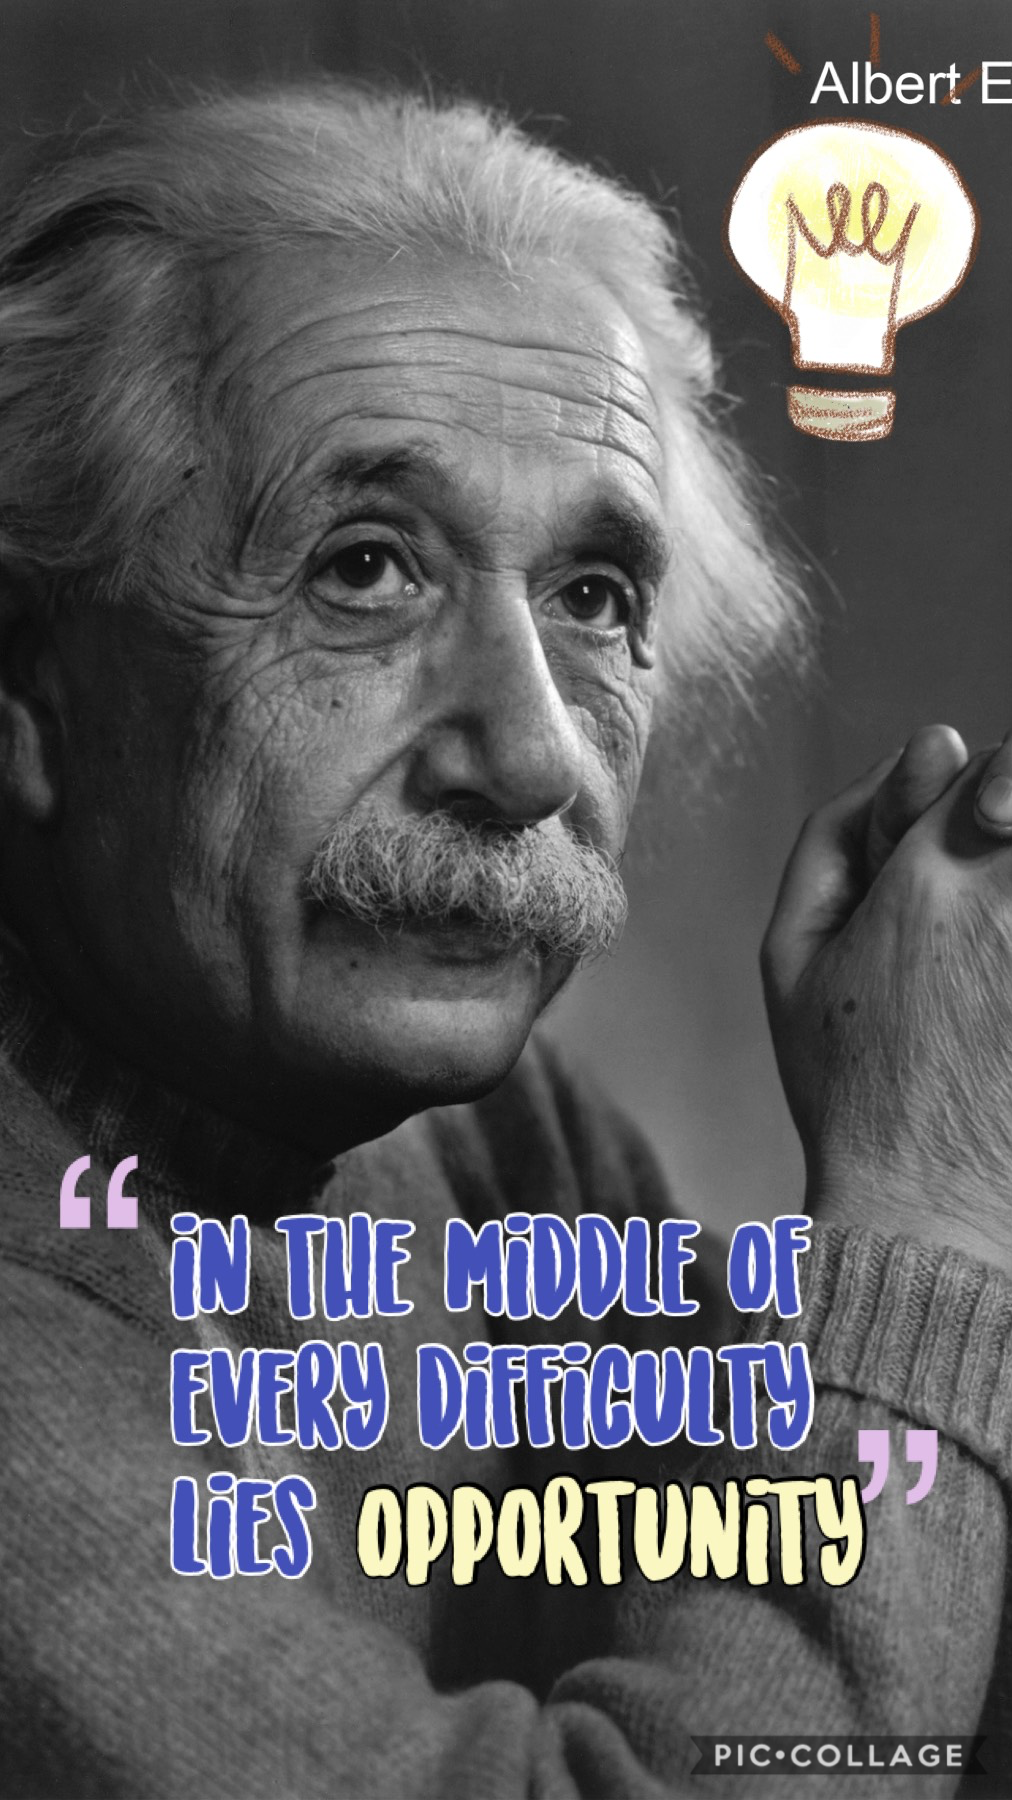 “in the middle of every difficulty lies opportunity” -albert einstein